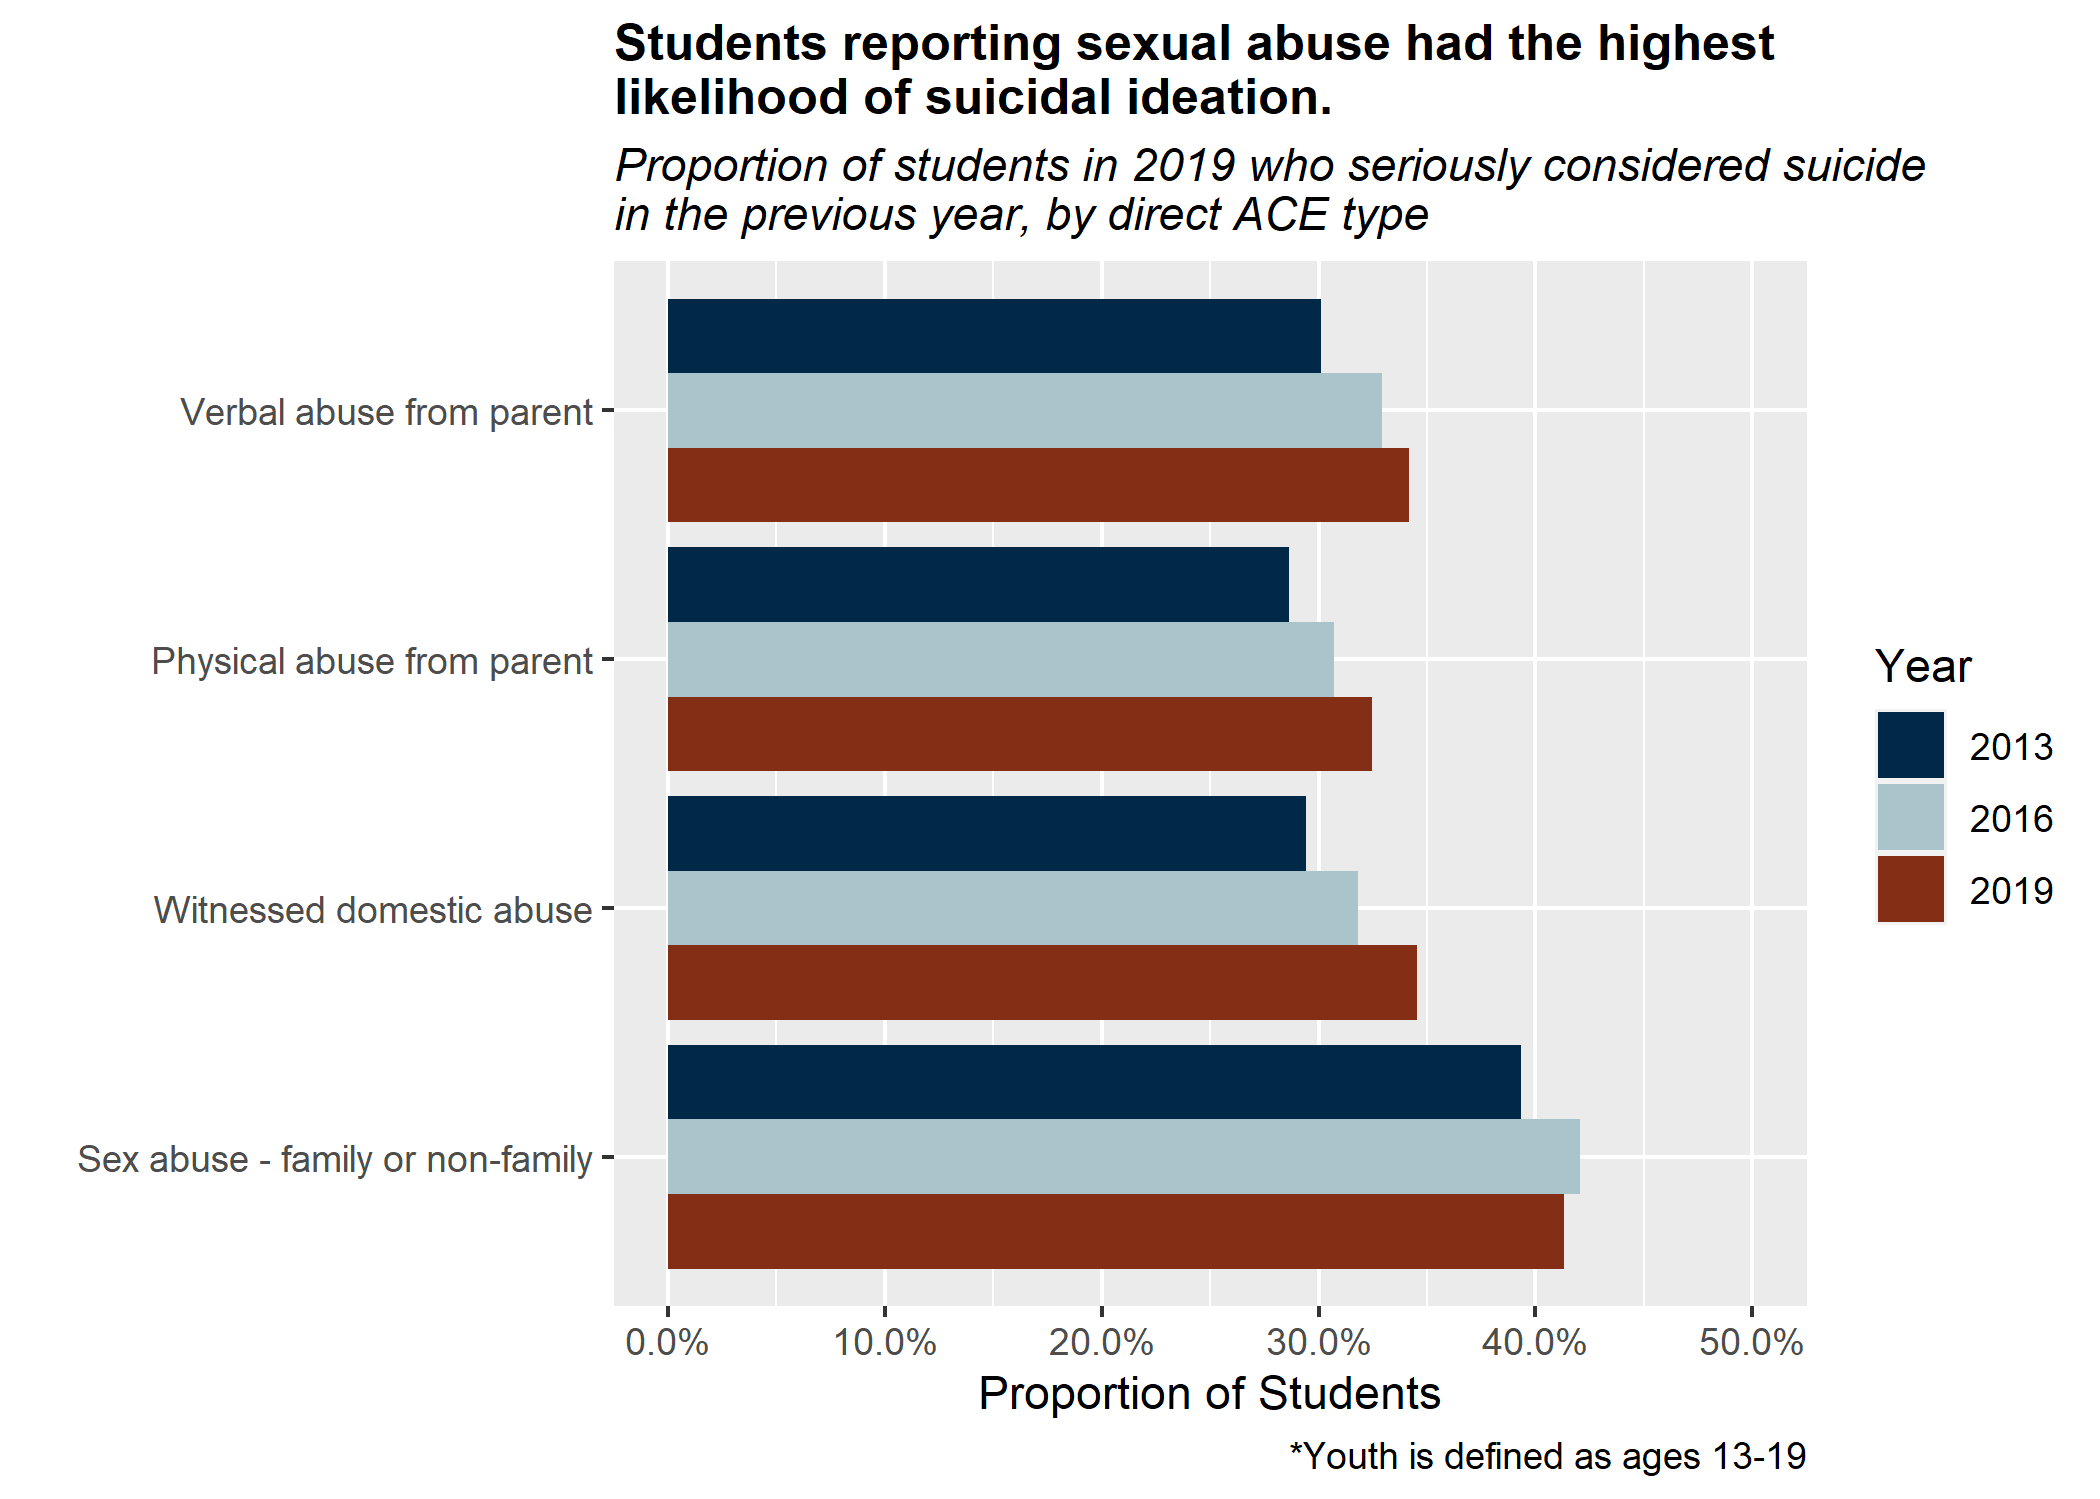 Students reporting sexual abuse had the highest liklihood of suicidal ideation.